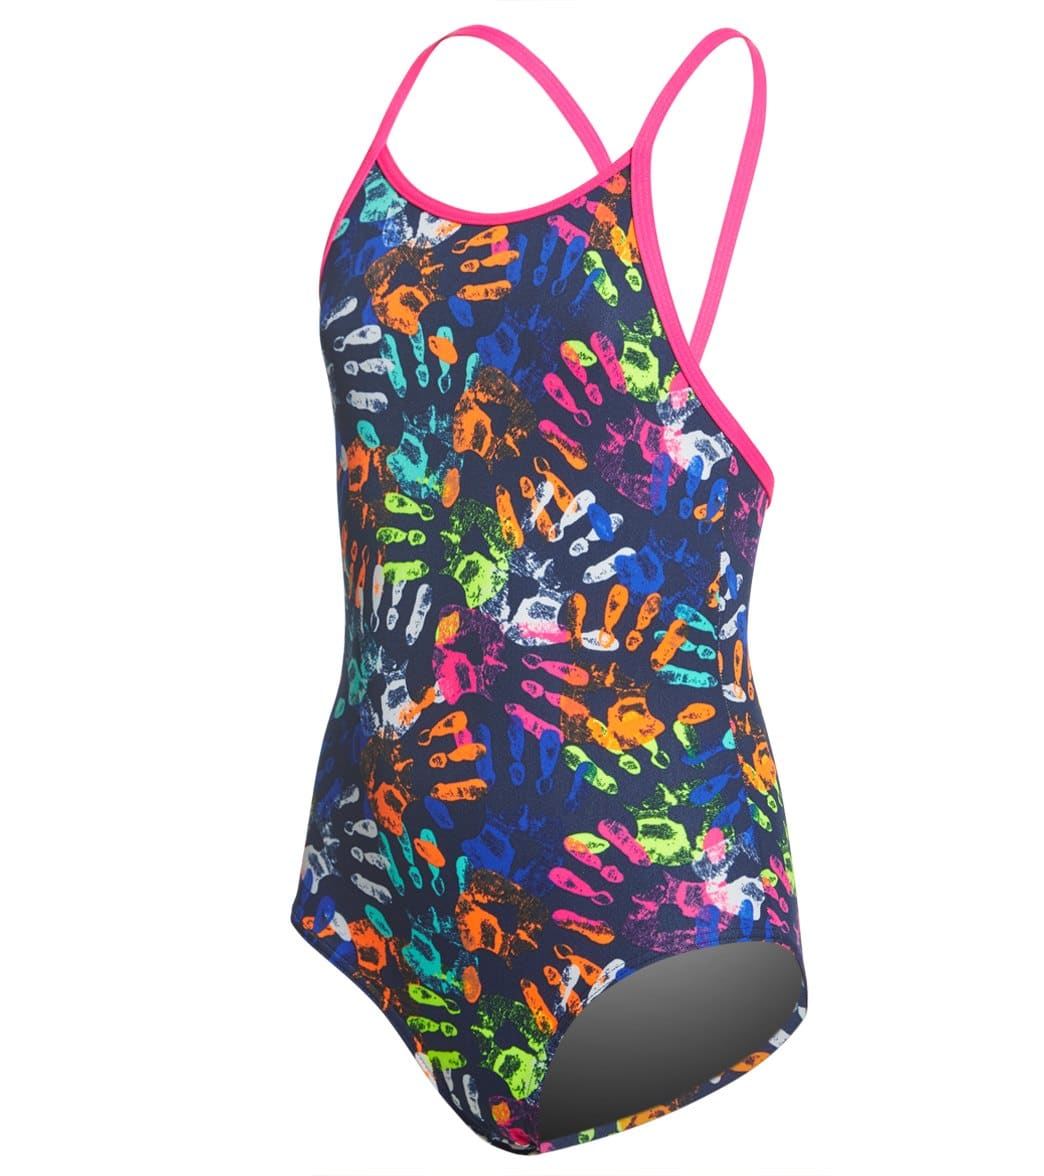 Funkita Toddler Girls' Hands Off One Piece Swimsuit - Multi 1T Polyester - Swimoutlet.com